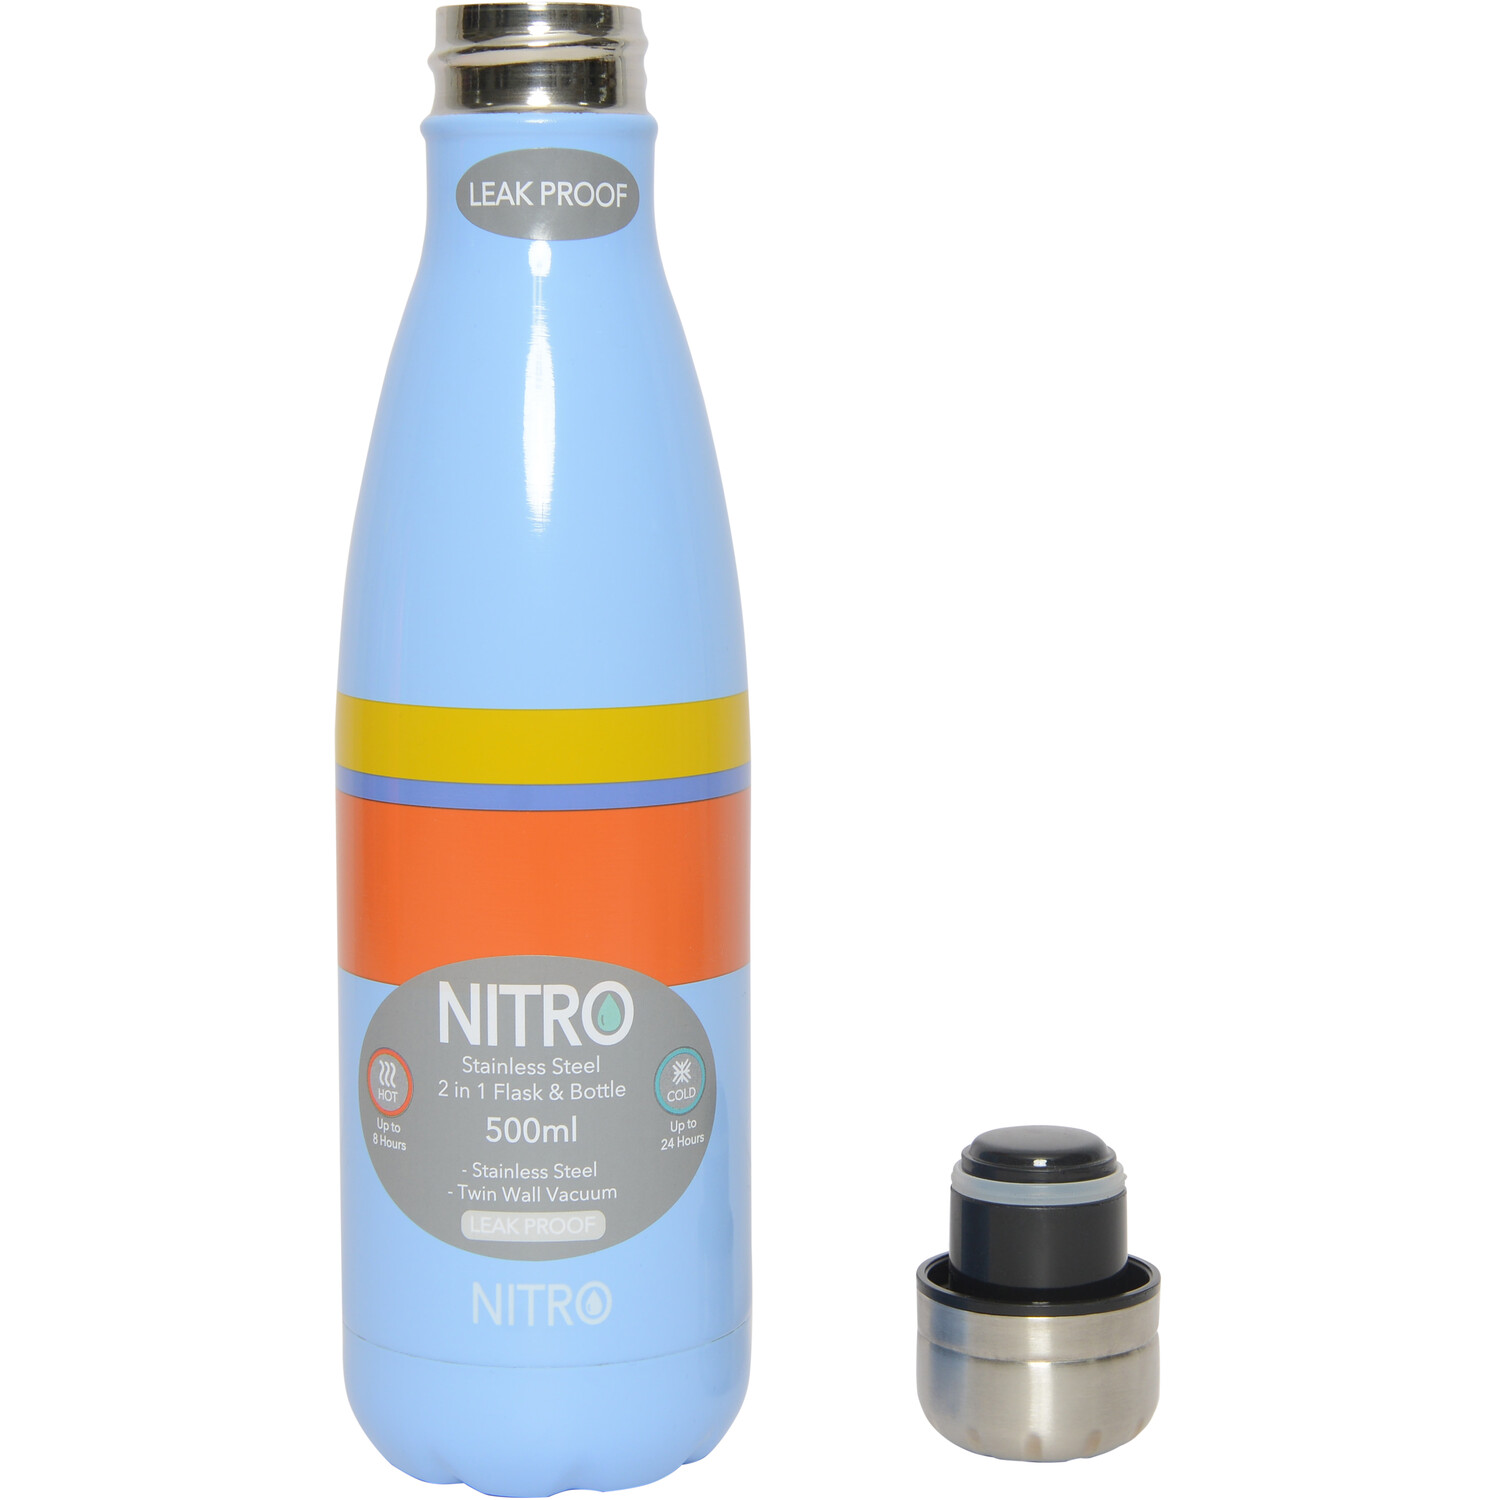 Striped Nitro Stainless Steel Bottle and Flask Image 4